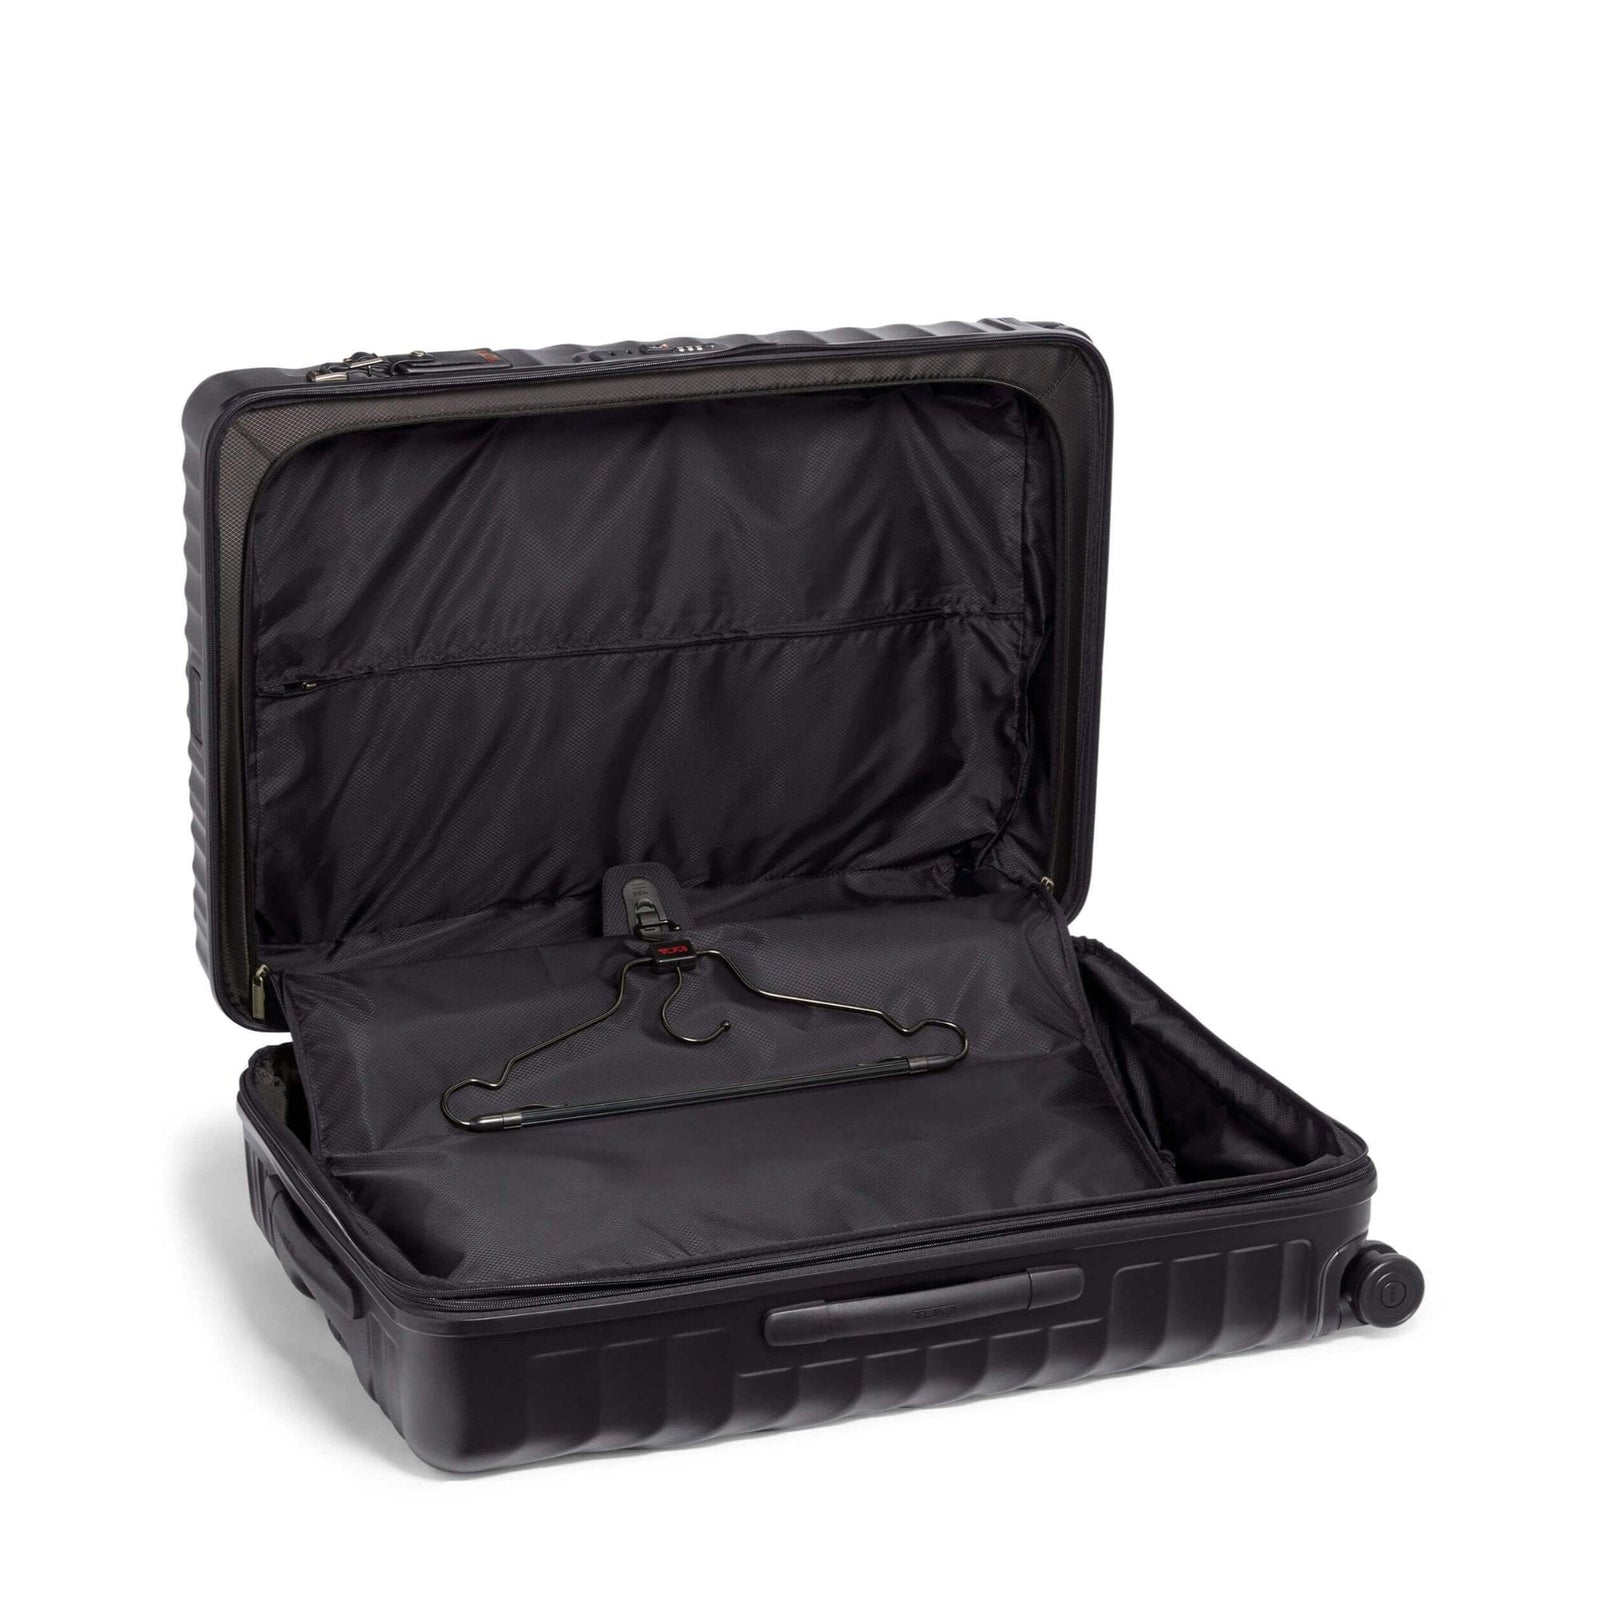 Tumi 19 Degree Extended Trip Checked Luggage XL in Black